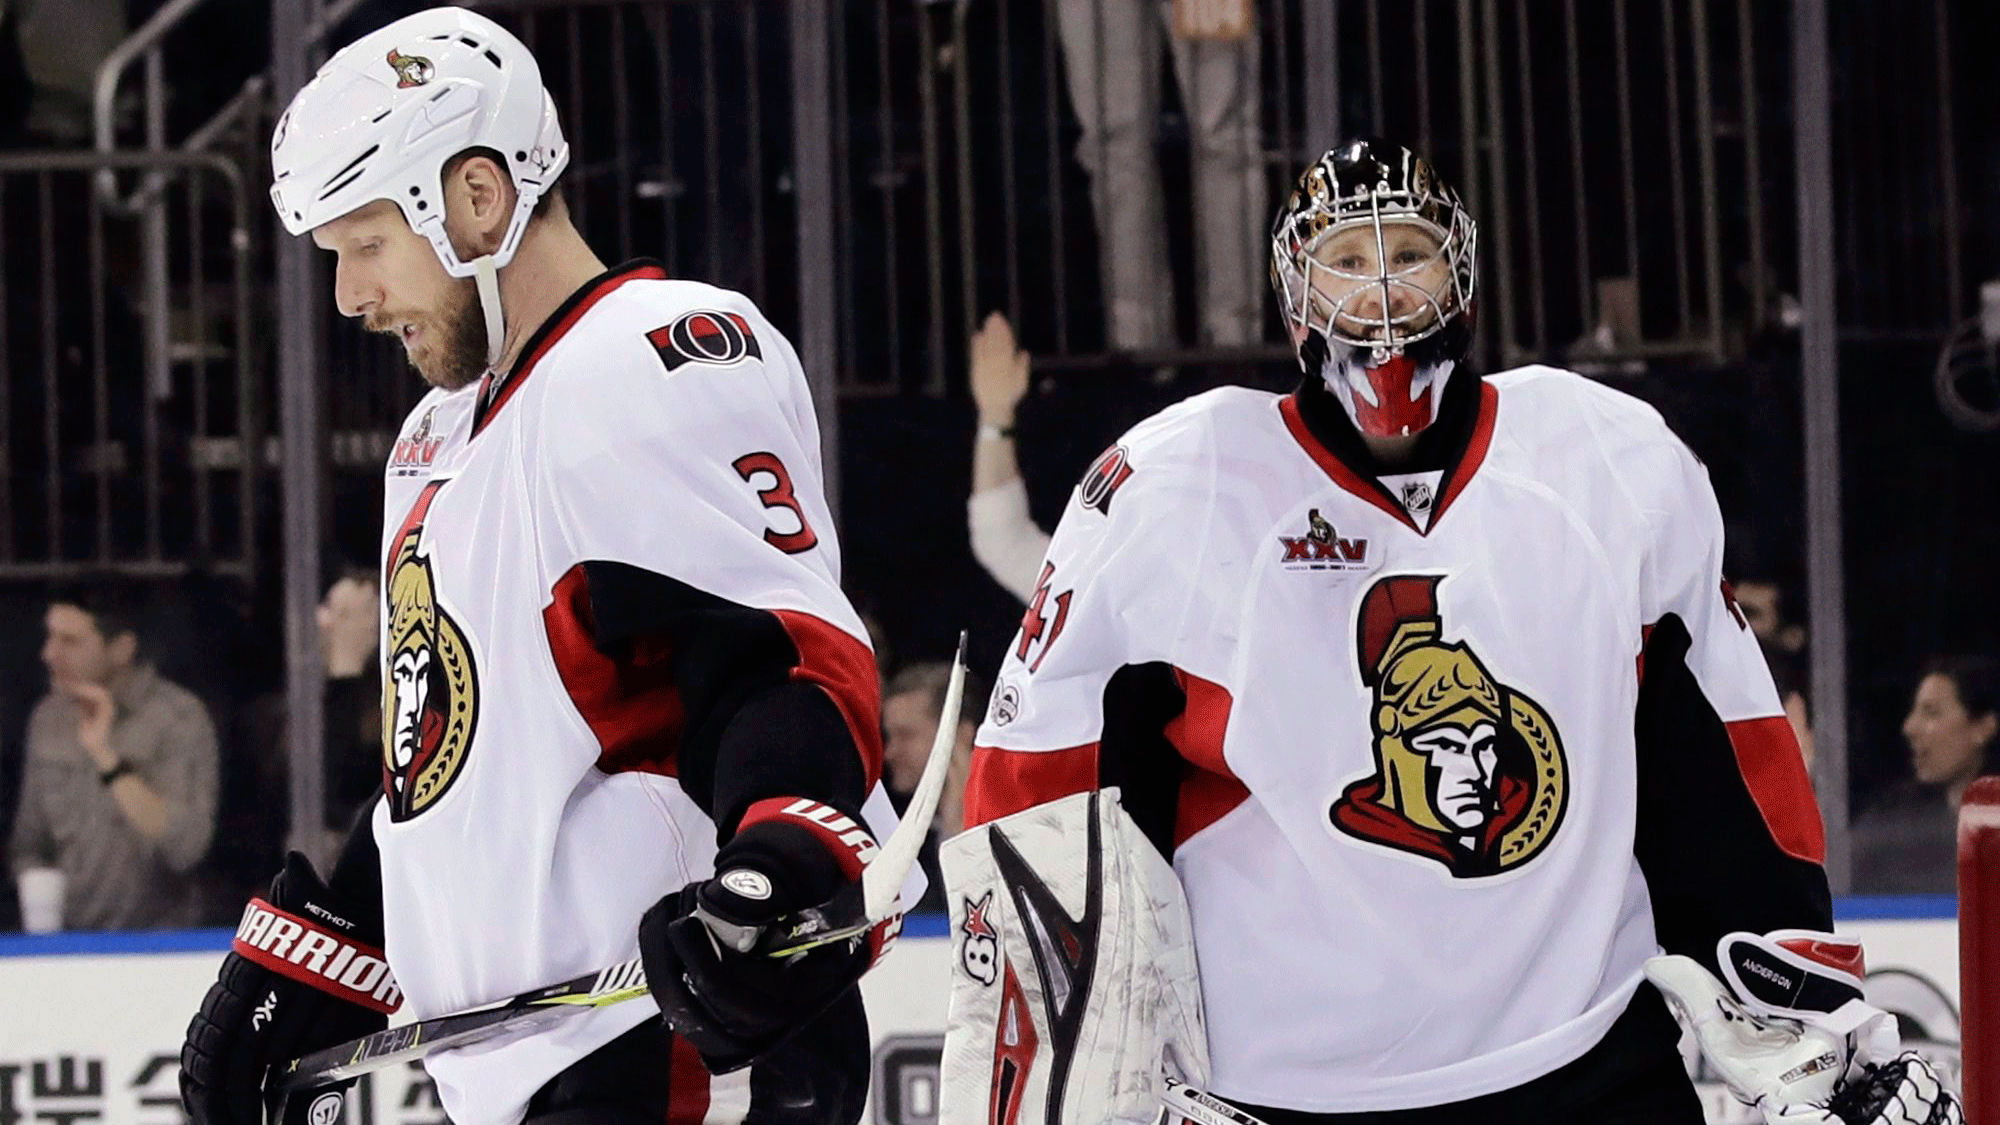 Senators’ Methot focused on Cup final, not getting even with Crosby